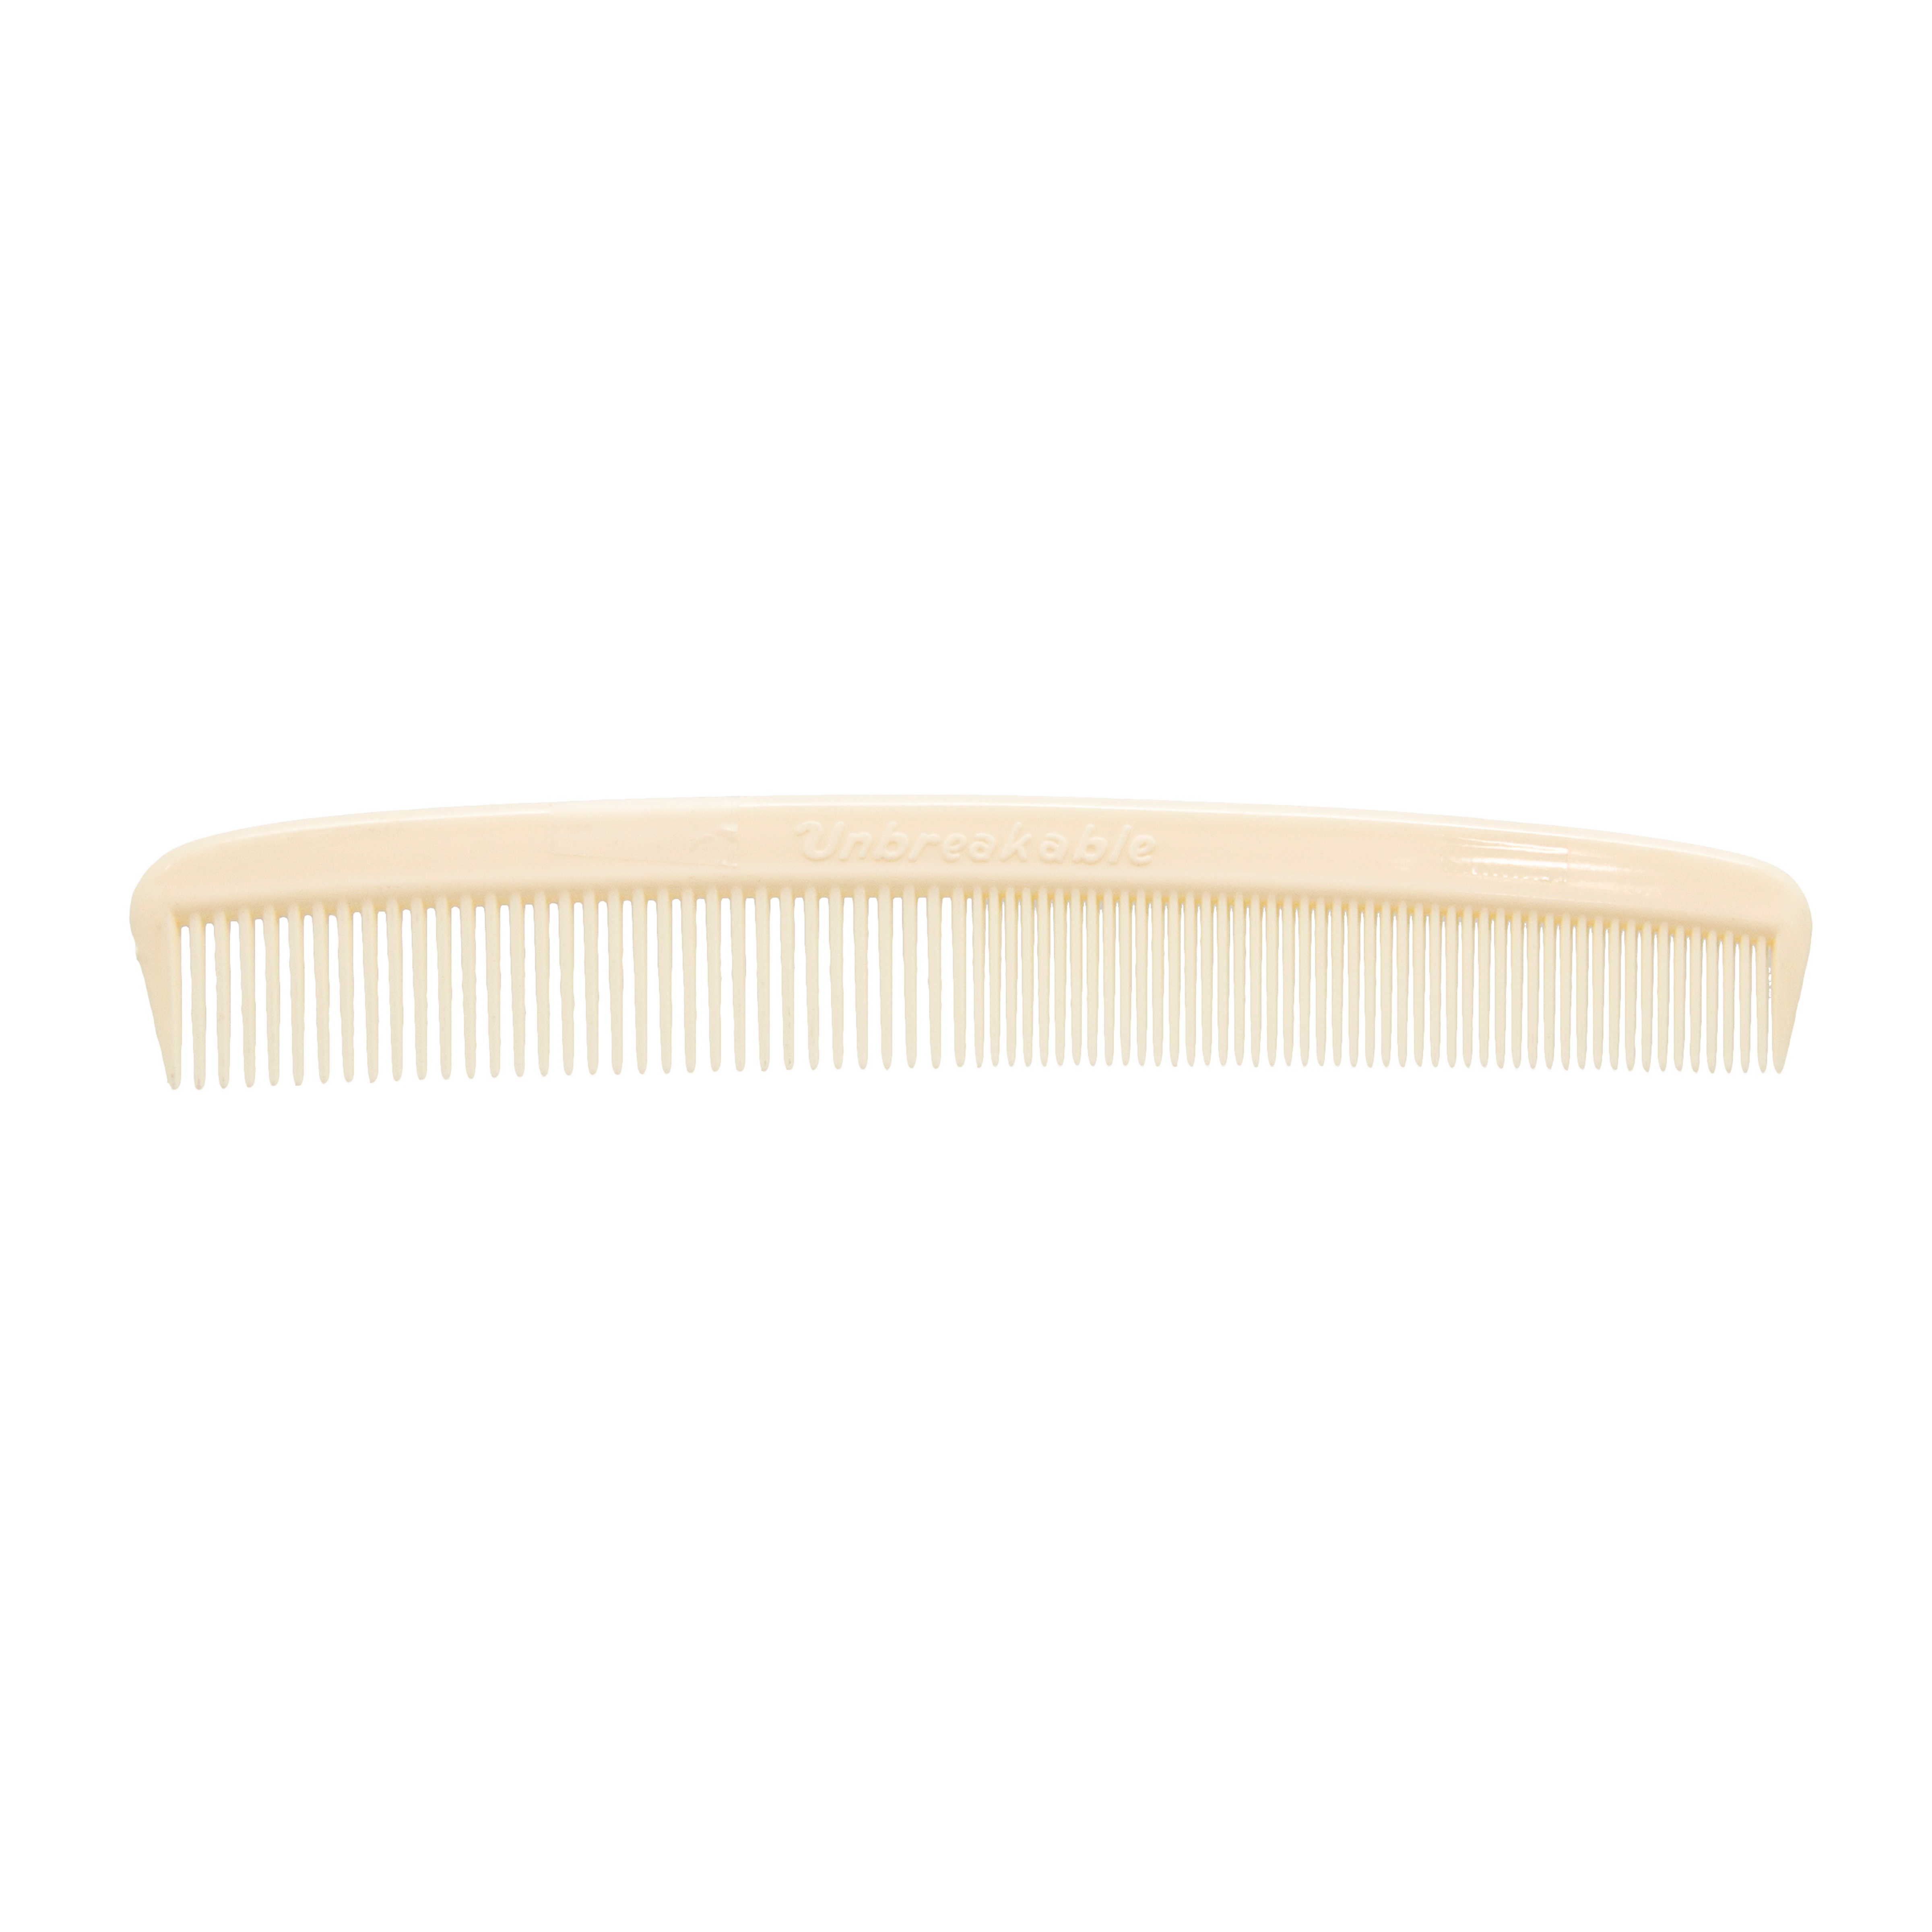 Hair Combs Products, Supplies and Equipment